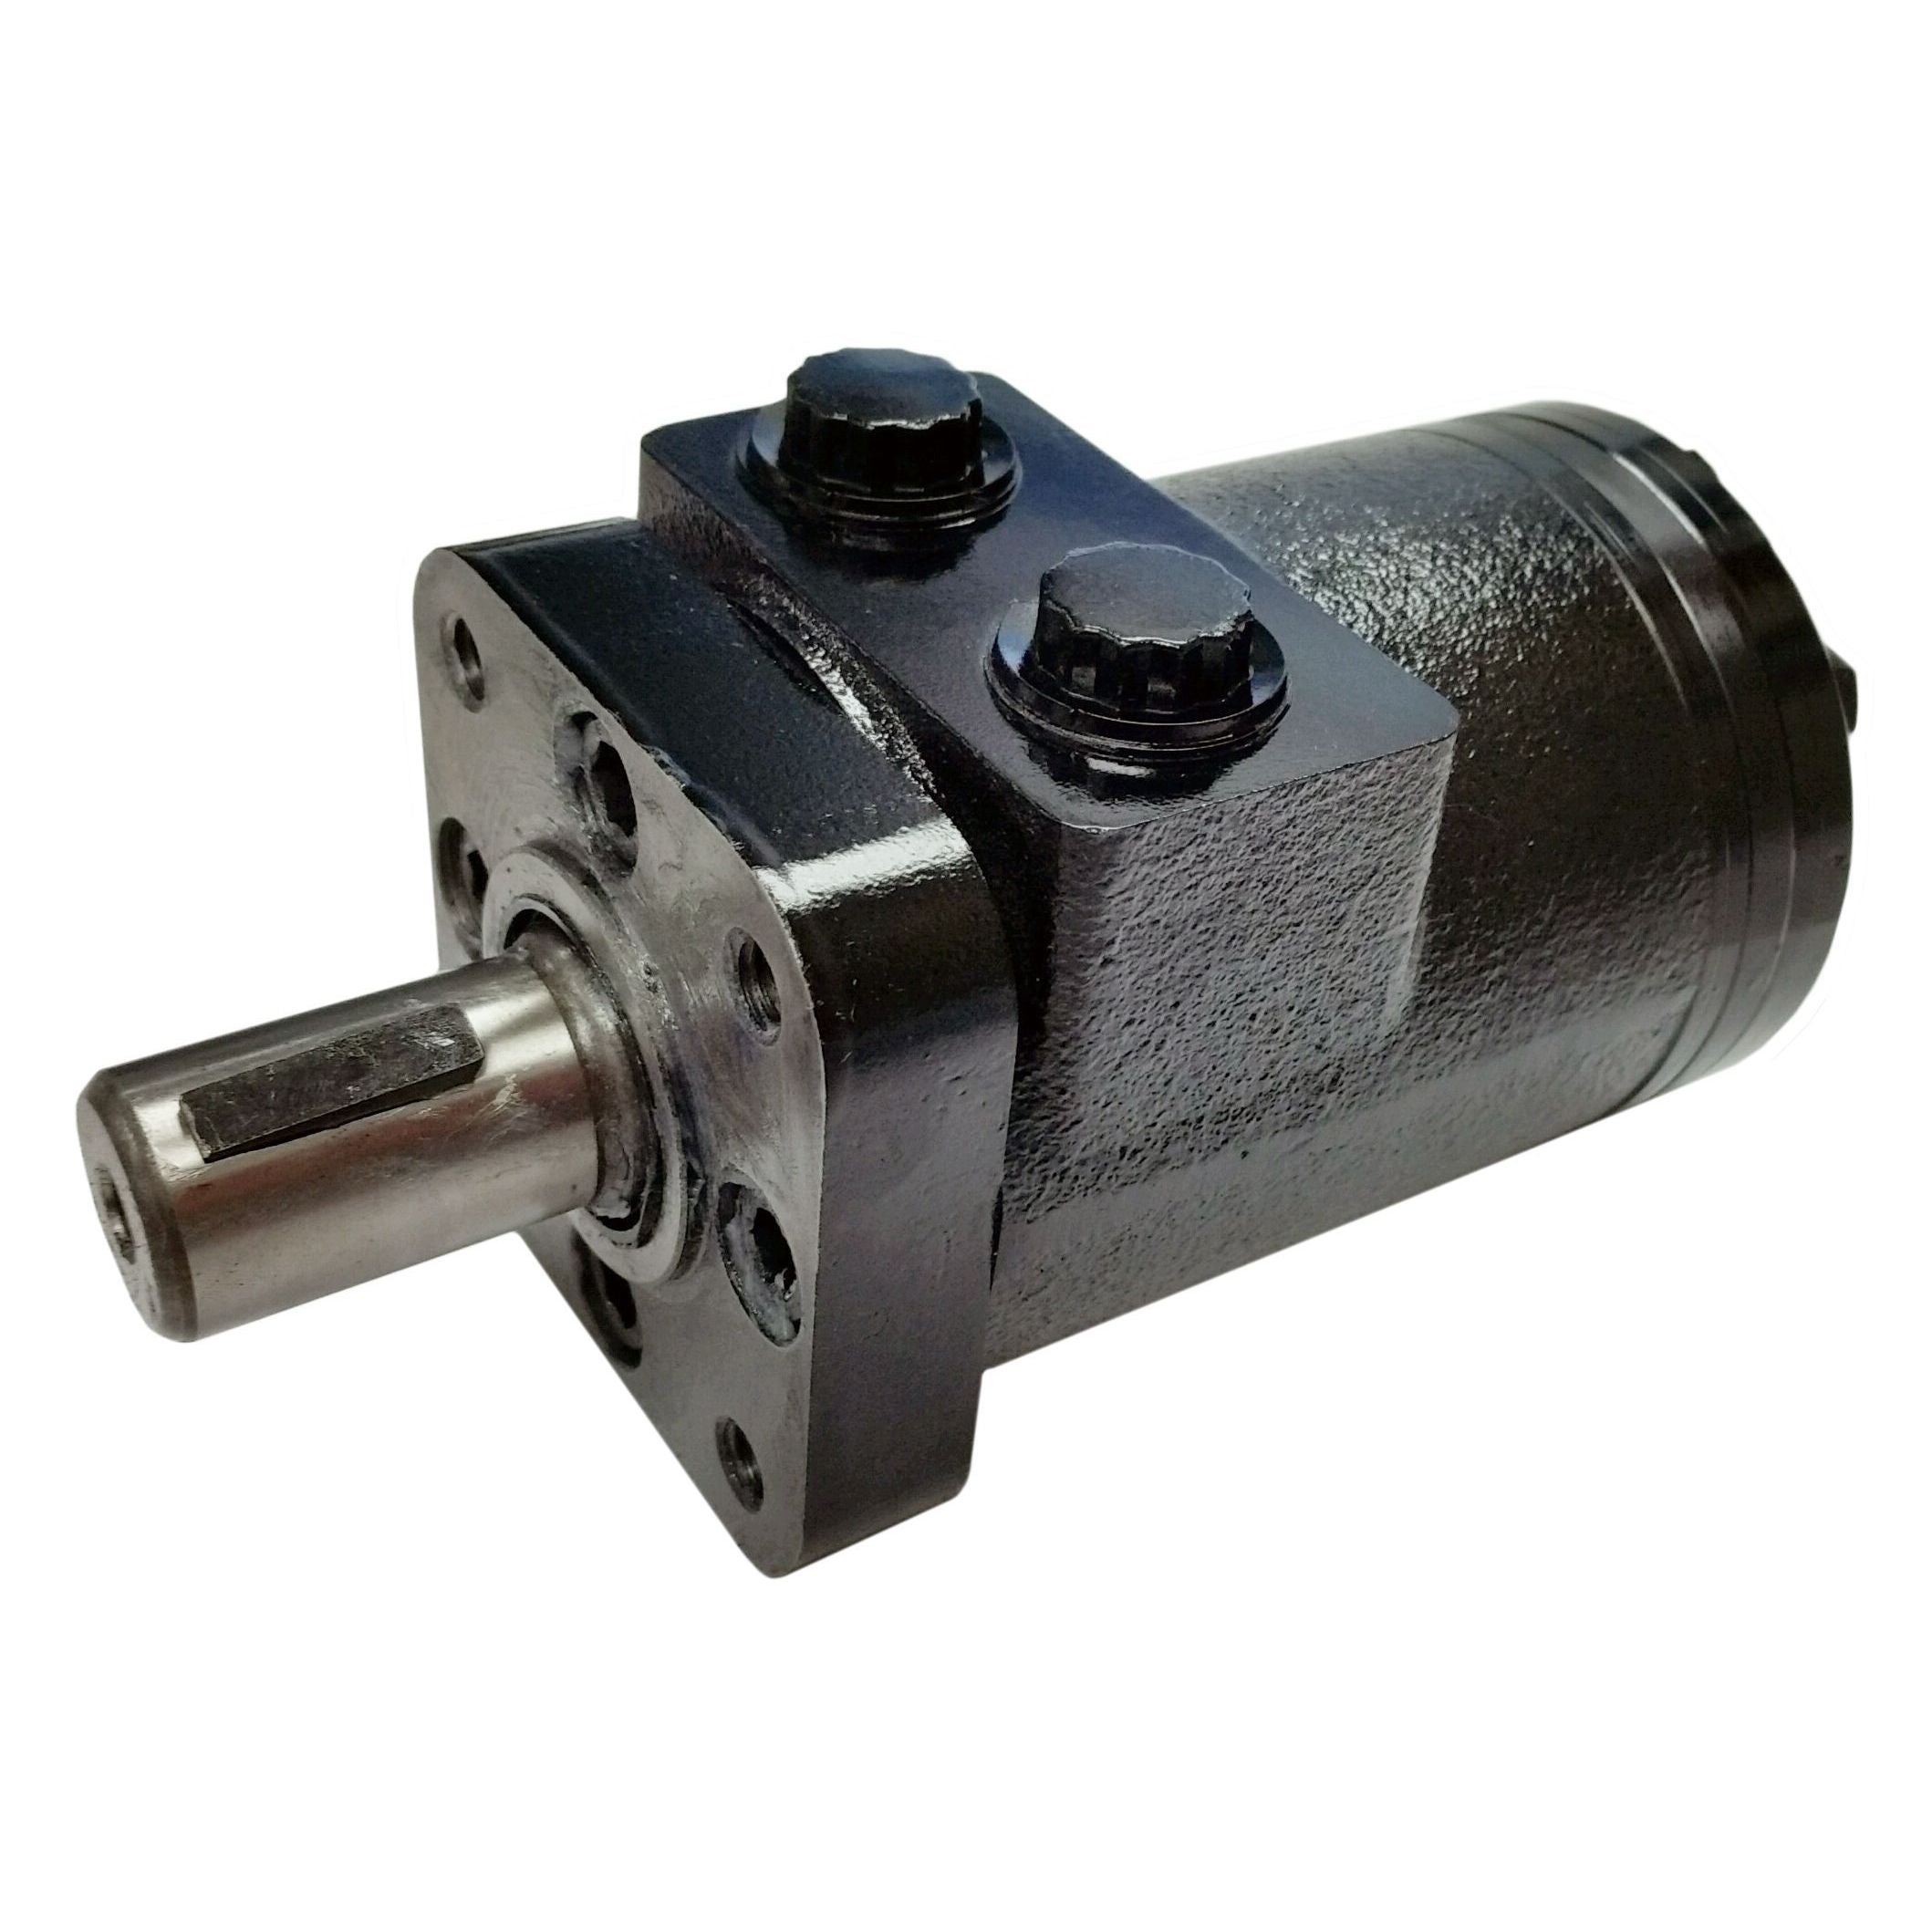 BMPH-80-H4-S-S : Dynamic LSHT Motor, 77.7cc, 770RPM, 1292in-lb, 2031psi Differential, 15.85GPM, SAE A 4-Bolt Mount, 6-Tooth Shaft, Side Ported, #10 SAE (5/8")